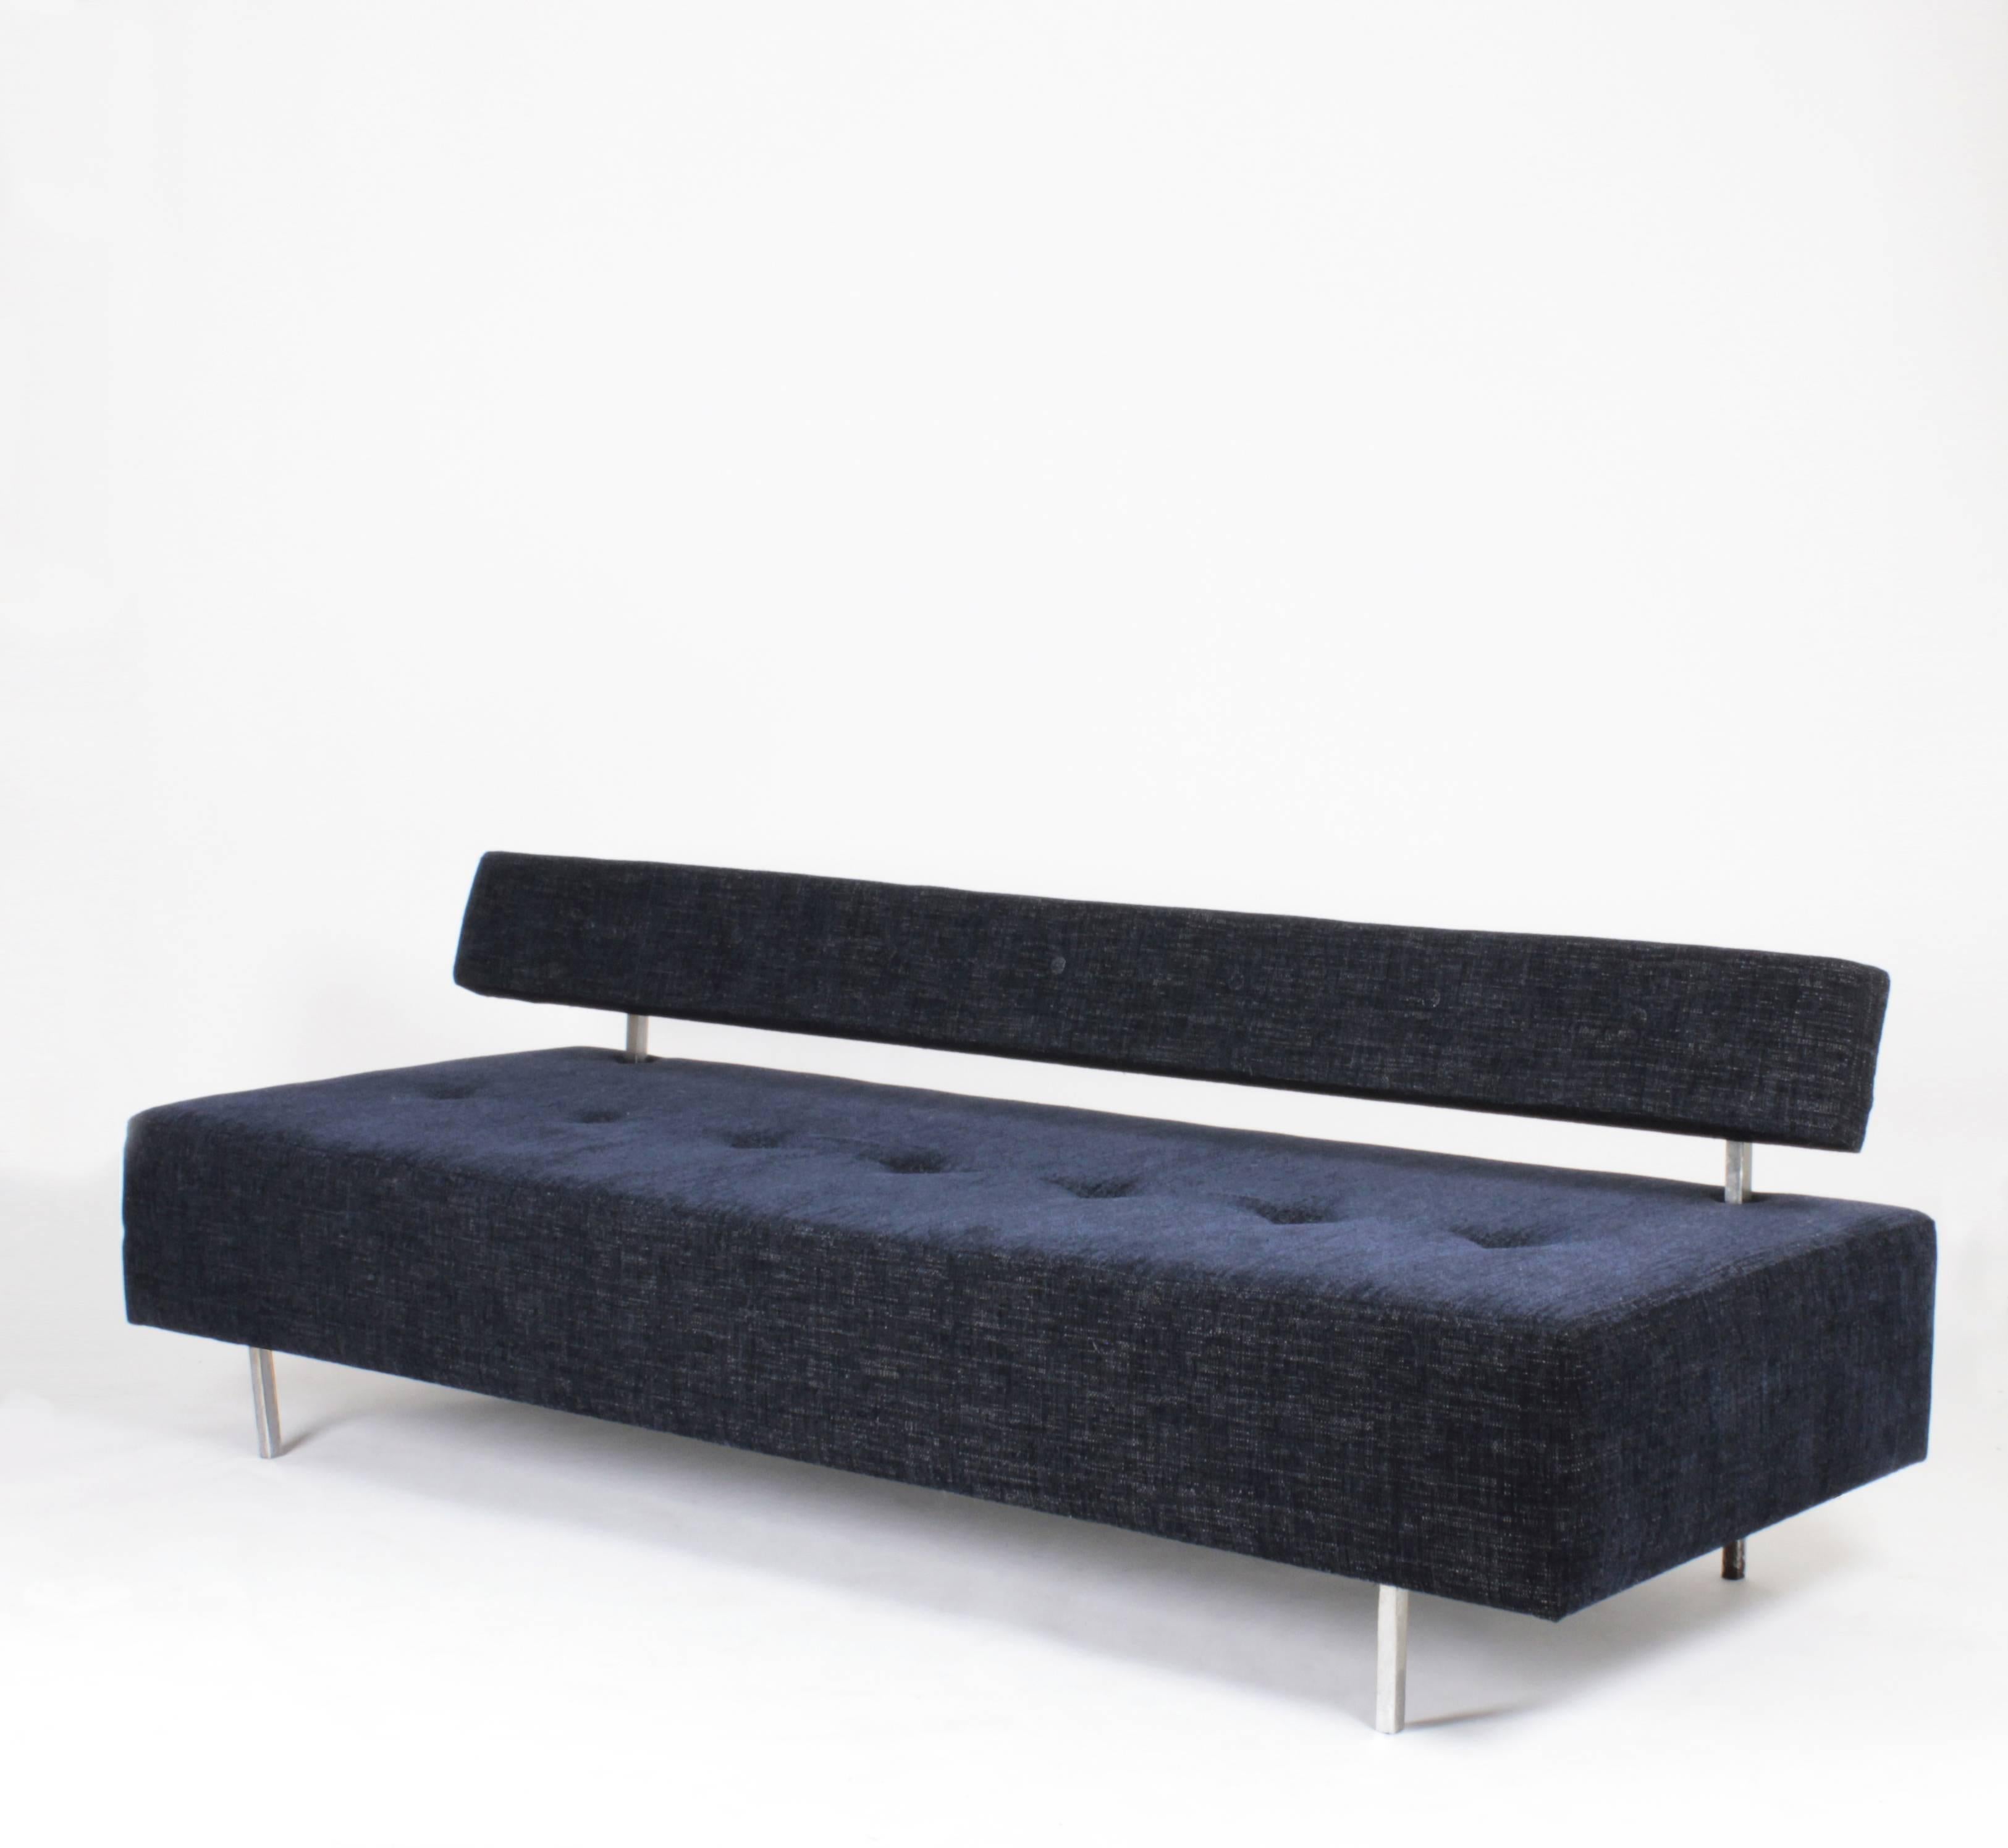 French AR-1 Sofa by Janine Abraham and Dirk Jan Rol, France, circa 1959-1960